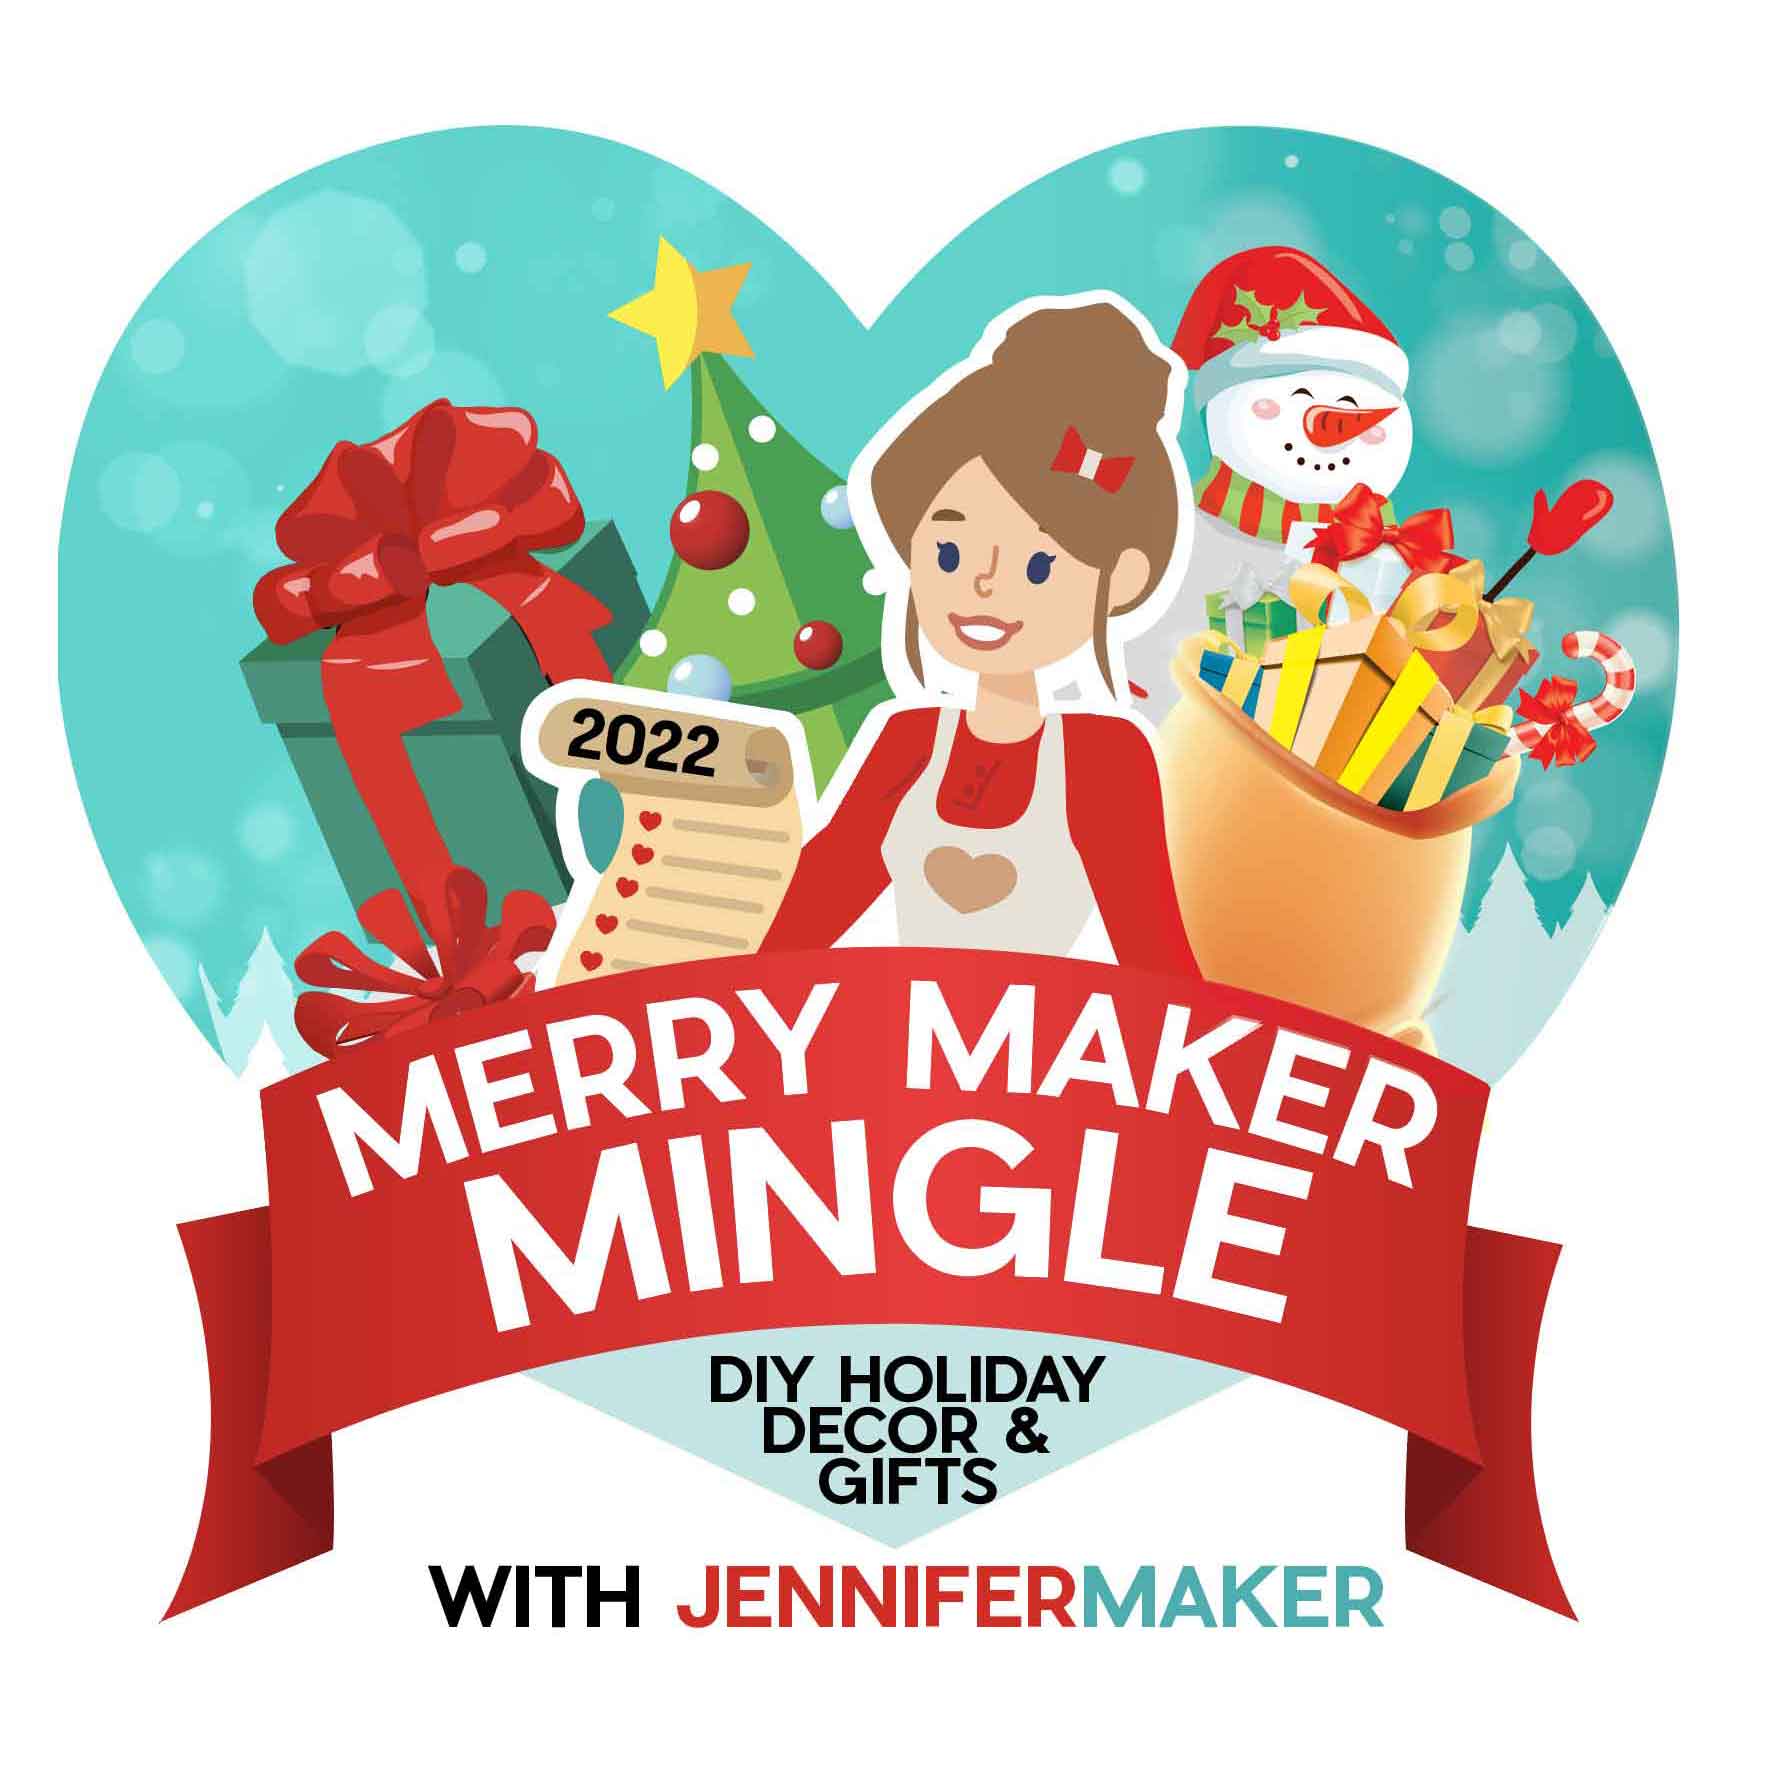 Merry Maker Mingle 2022: Our Annual Countdown to Christmas